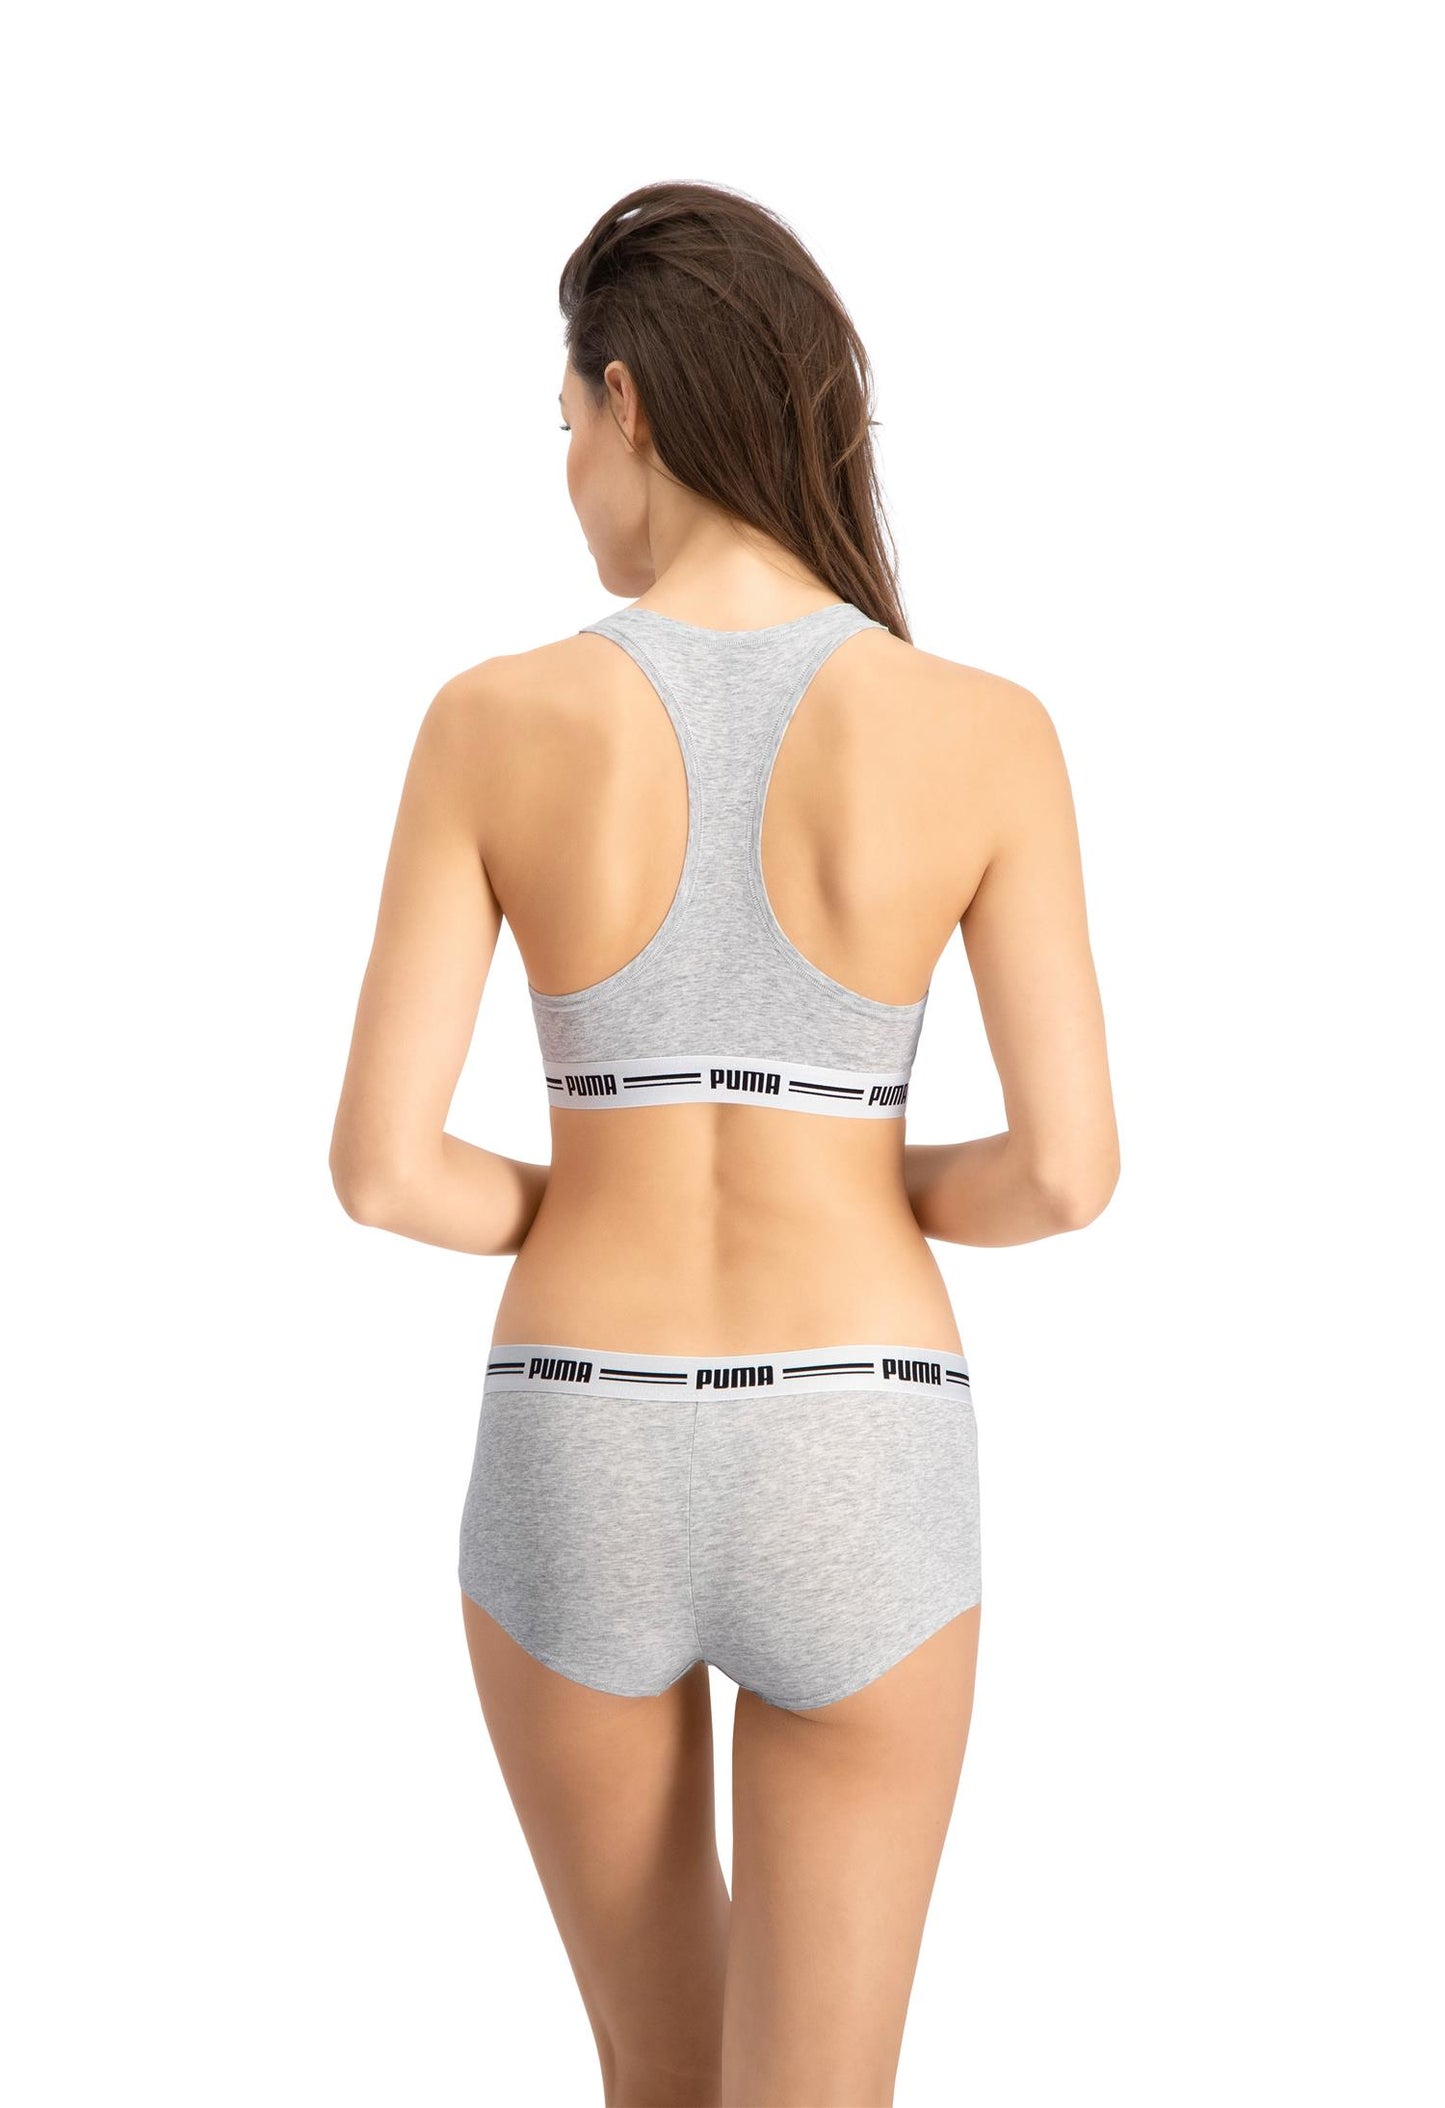 W Iconic racer back top